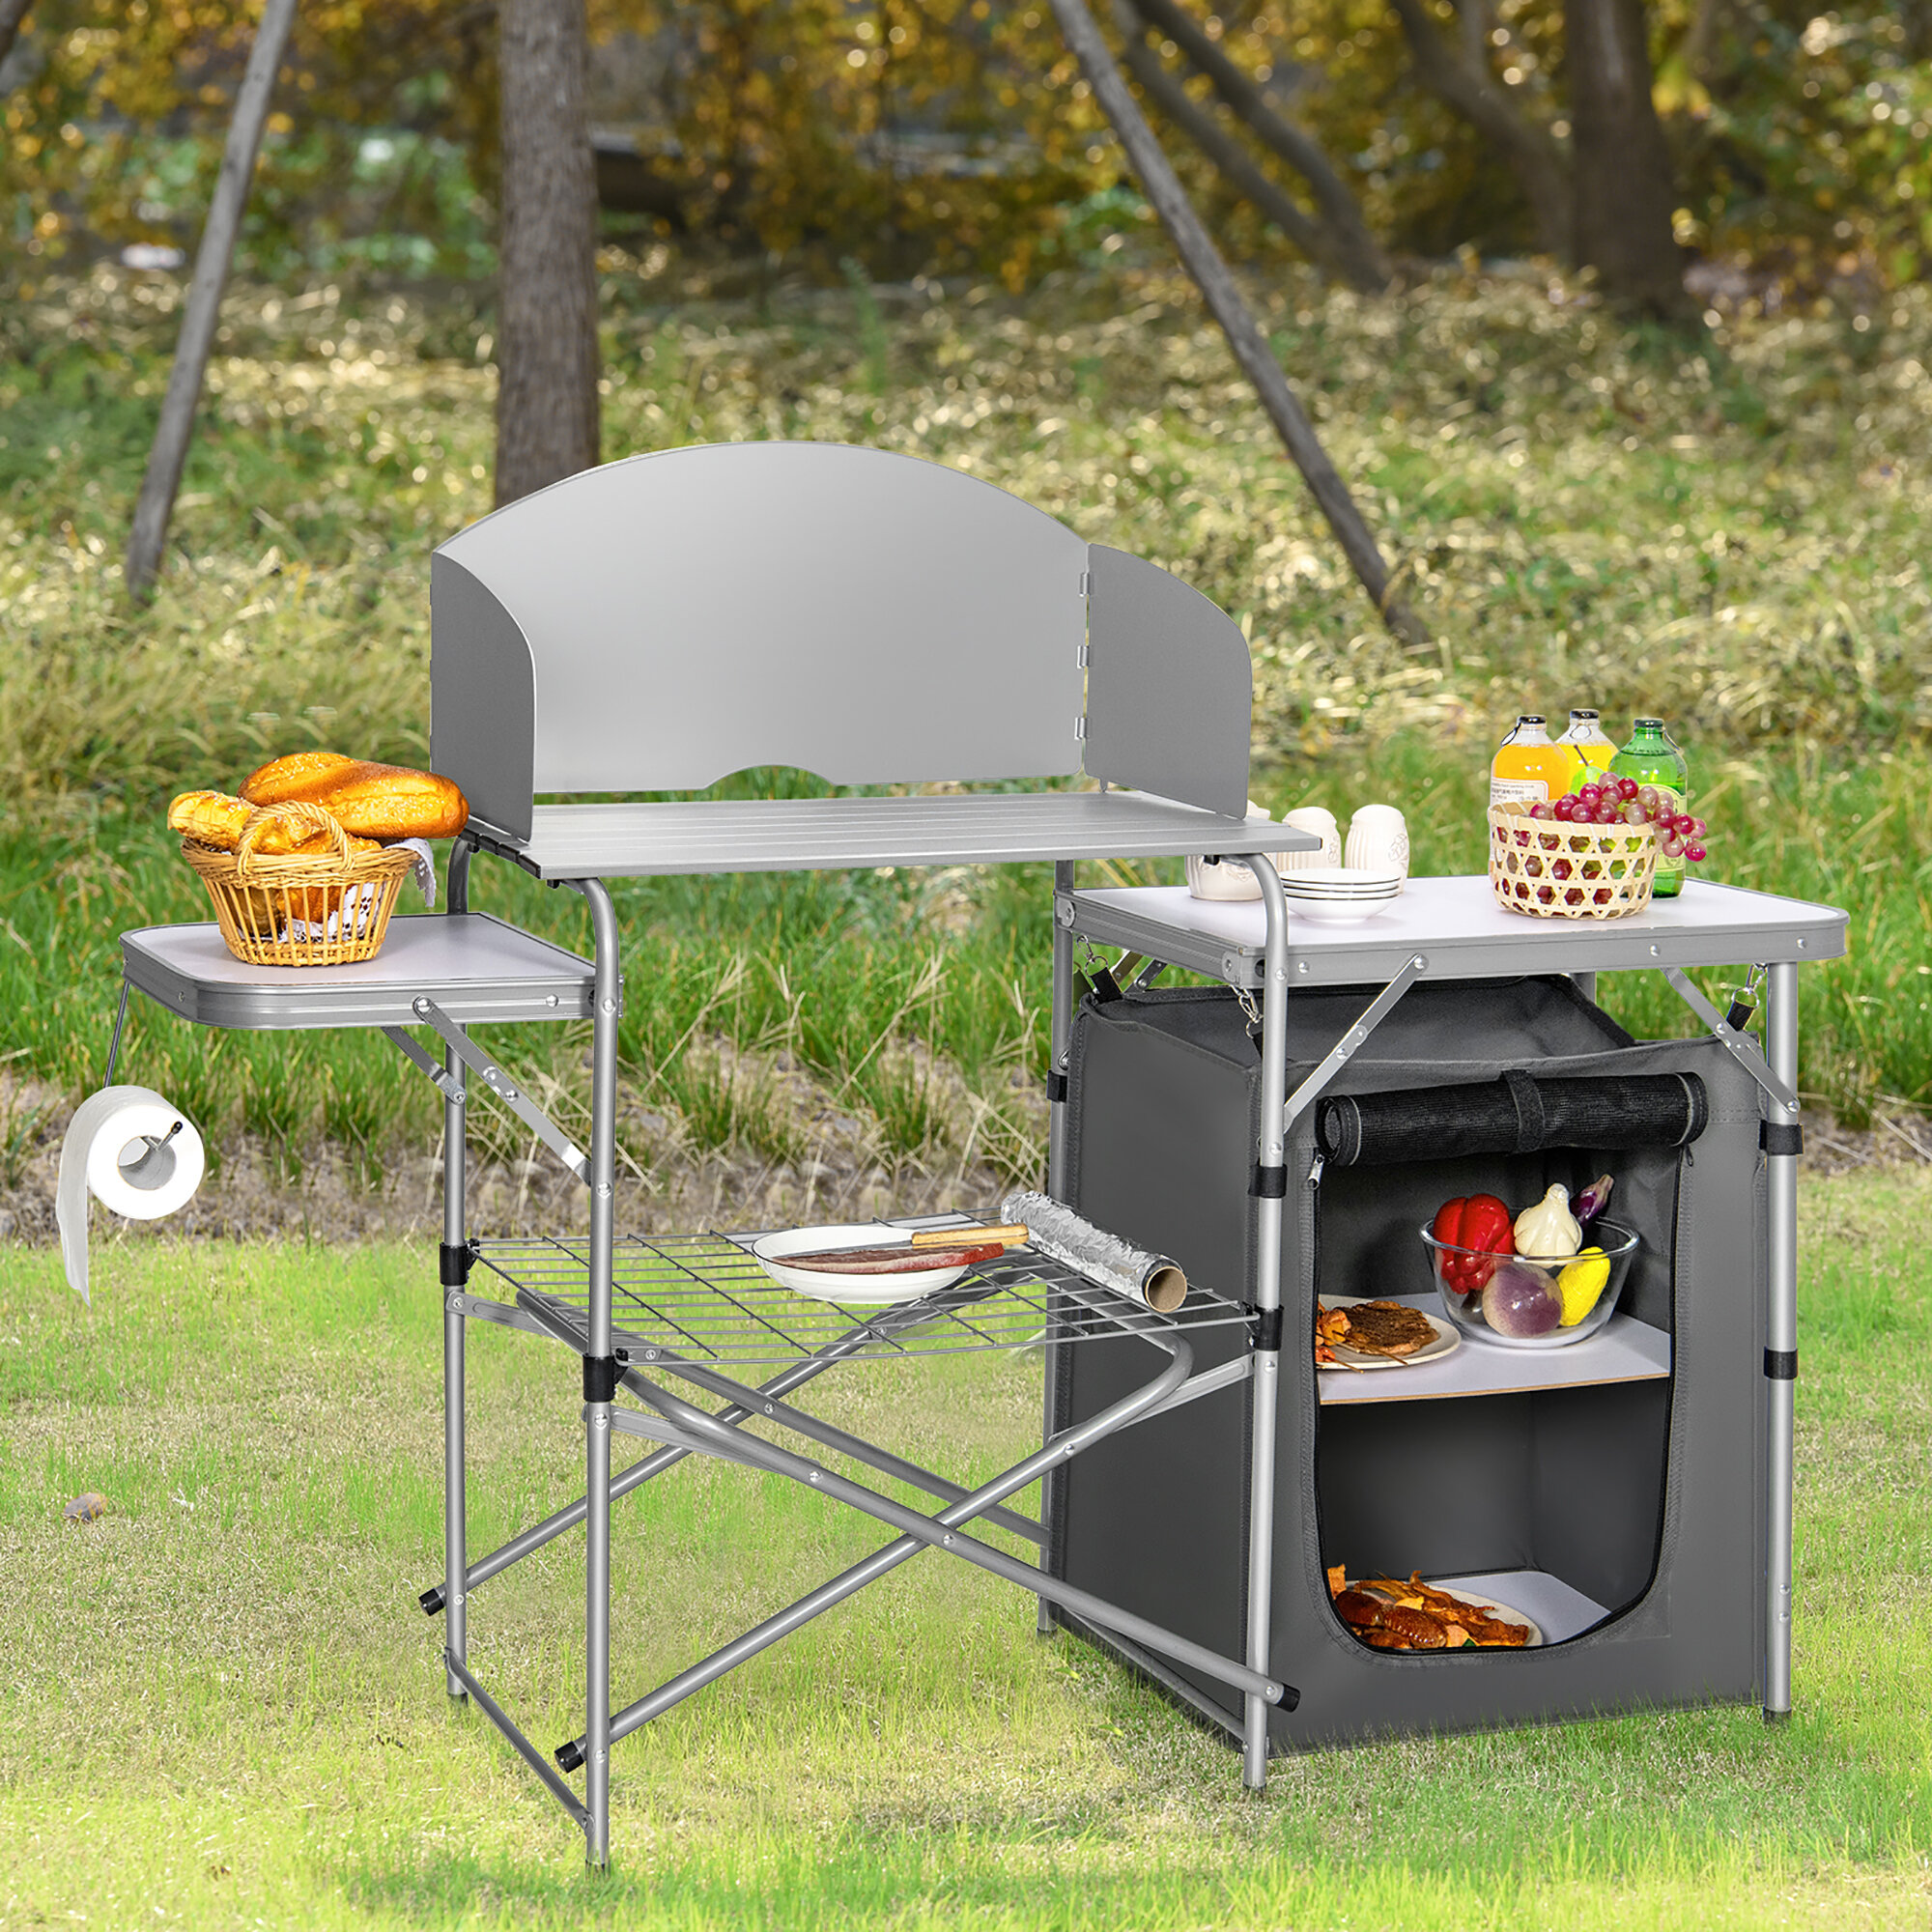 REDCAMP Folding Portable Grill Table for Camping, Lightweight Aluminum  Metal Grill Stand Table with Adjustable Height Legs for Outside Cooking  Outdoor